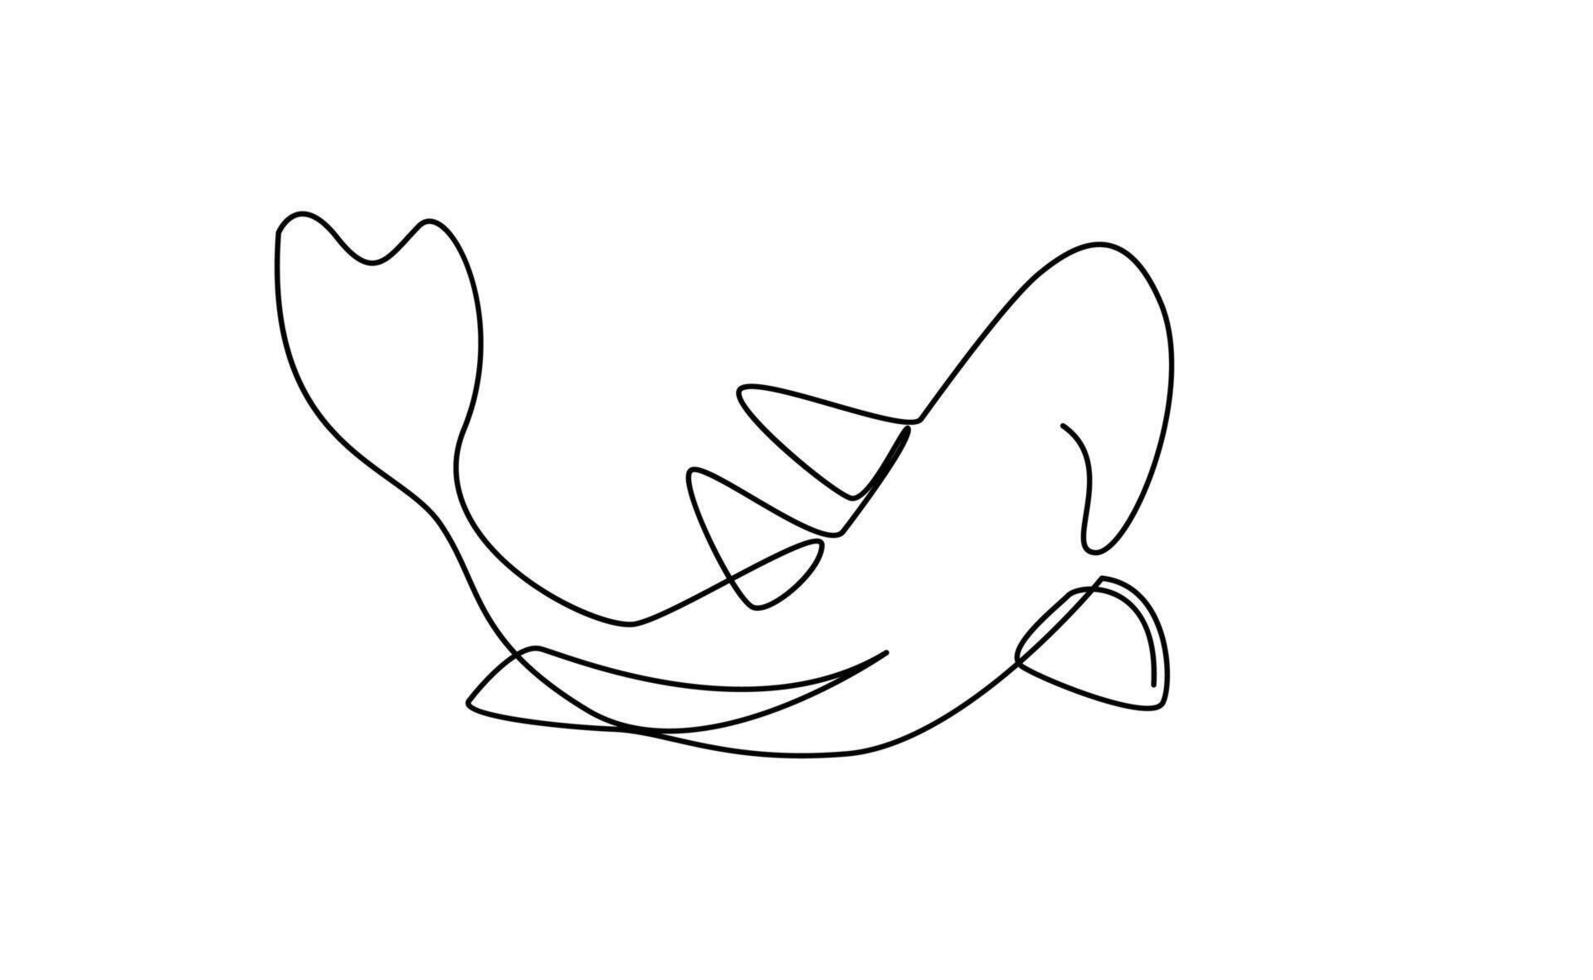 koi carp fish on the white background in a continuous single line drawing style vector